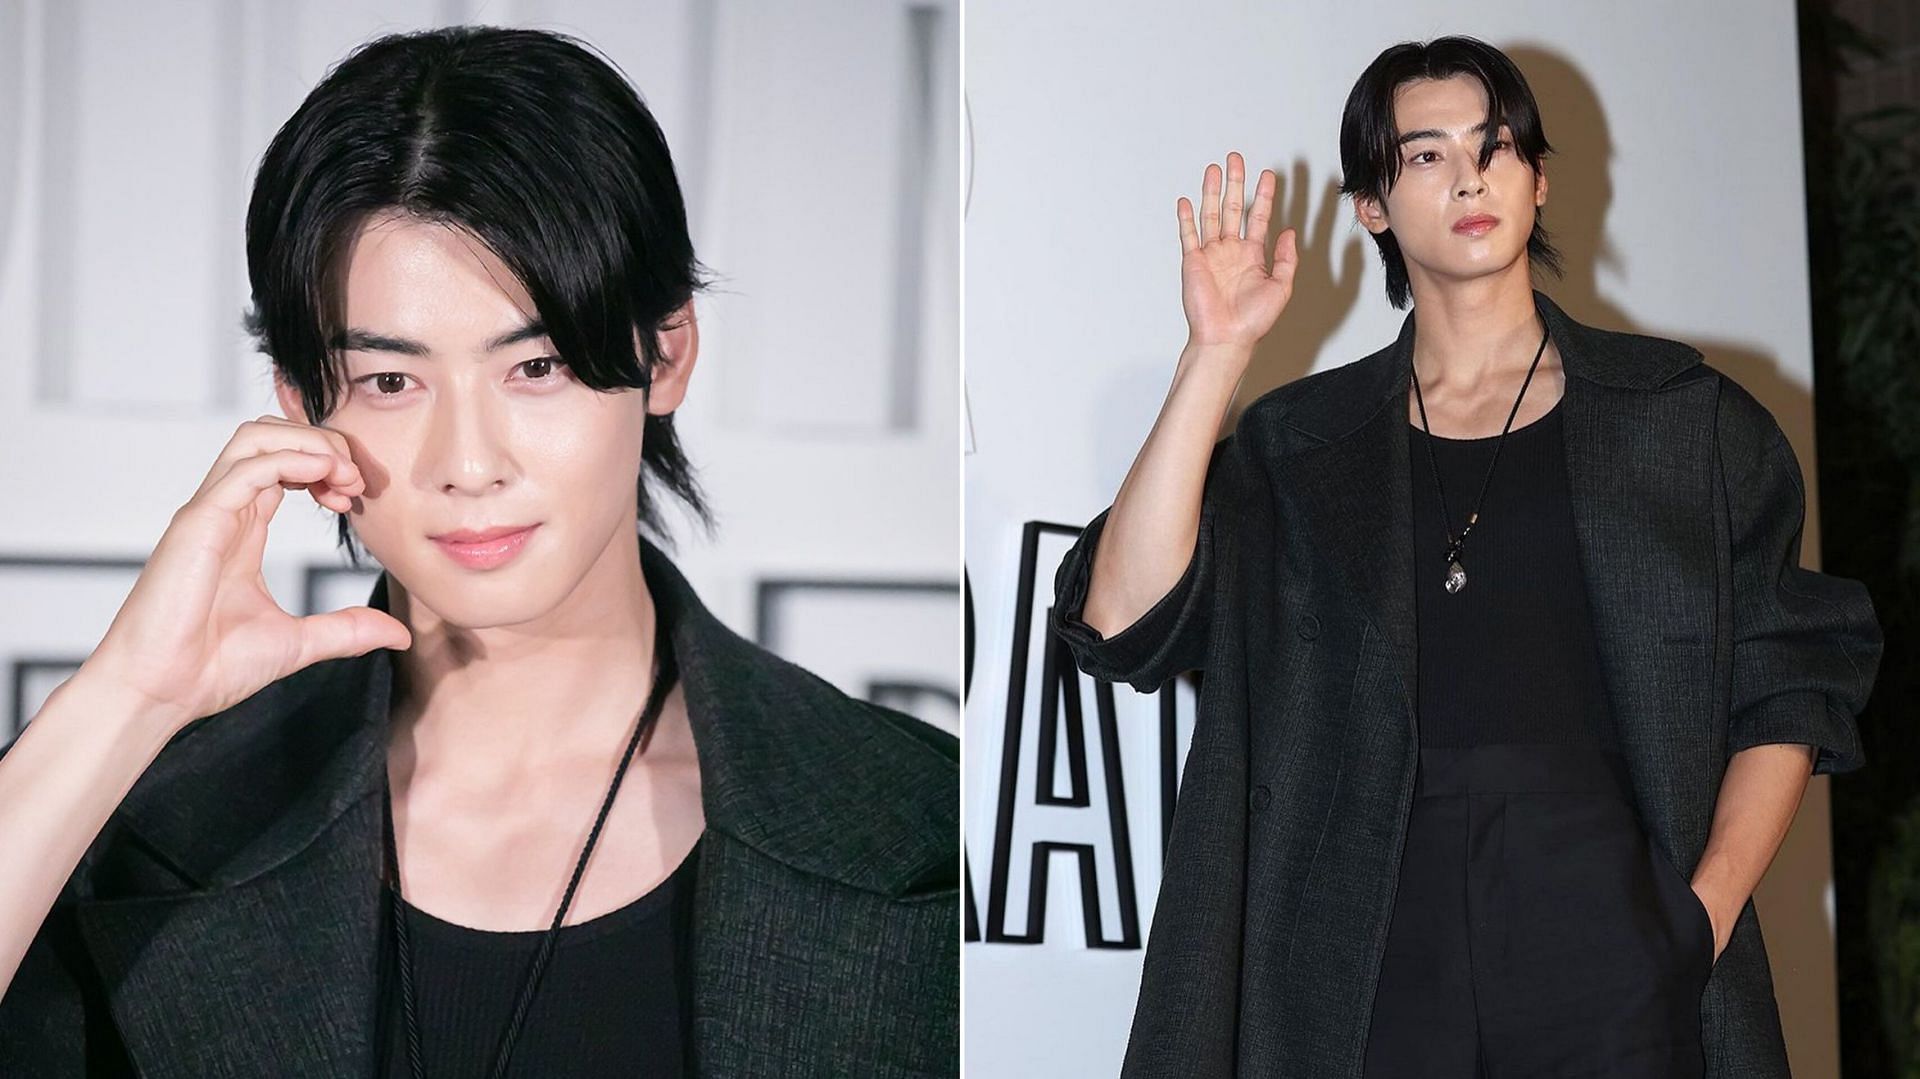 YOU ARE SUCH AN ART: Cha Eun-woo turns heads at Lady Dior